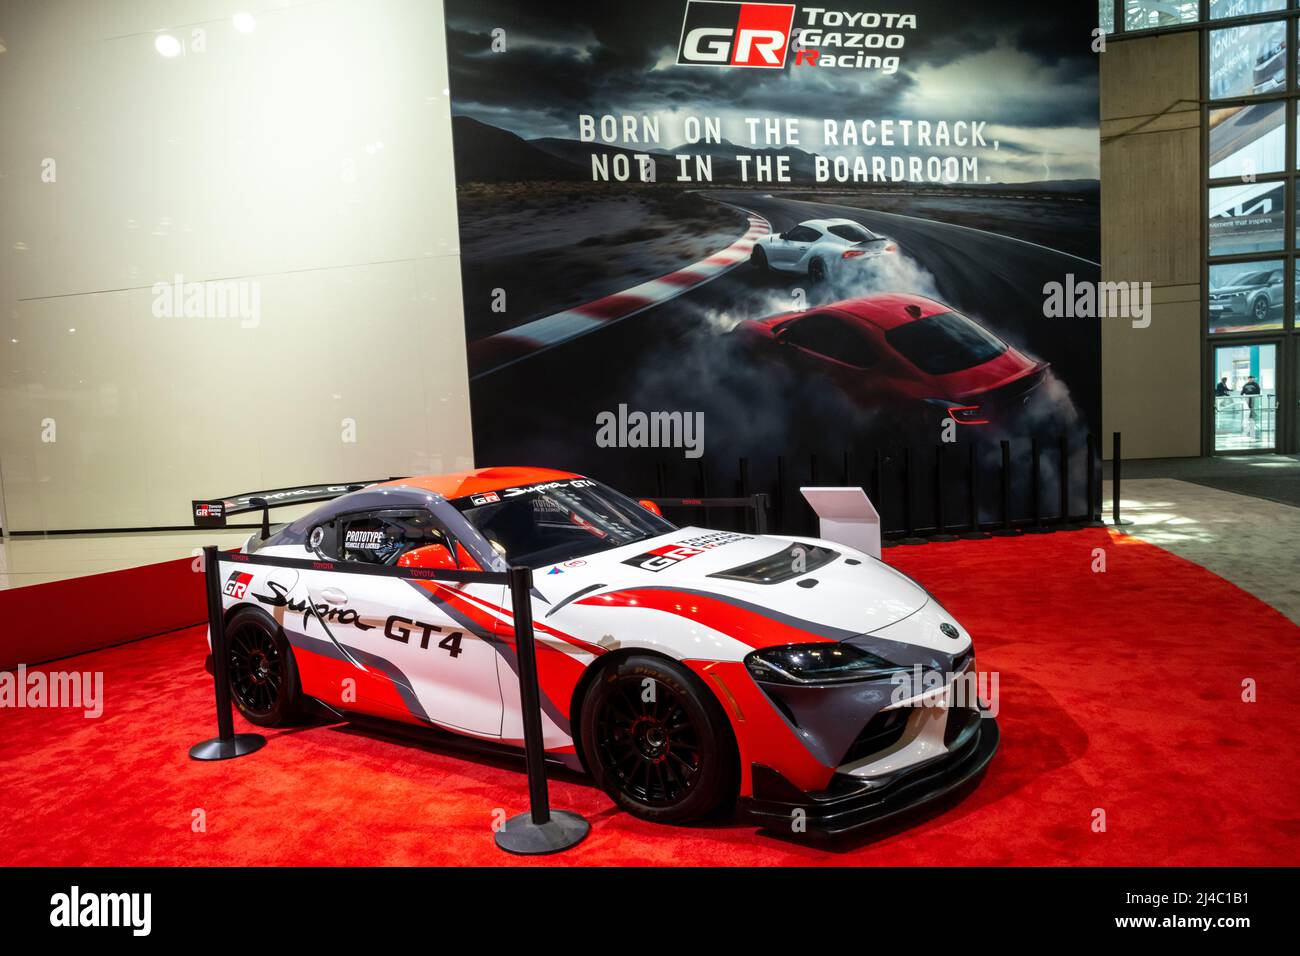 New York, USA. 13th Apr, 2022. A Toyota Supra GT4 racing car on display at the 2022 New York International Auto Show at the Javits Center in New York City. The normally annual show opened today after it was cancelled the two previous years due to the COVID-19 pandemic. Credit: Enrique Shore/Alamy Live News Stock Photo